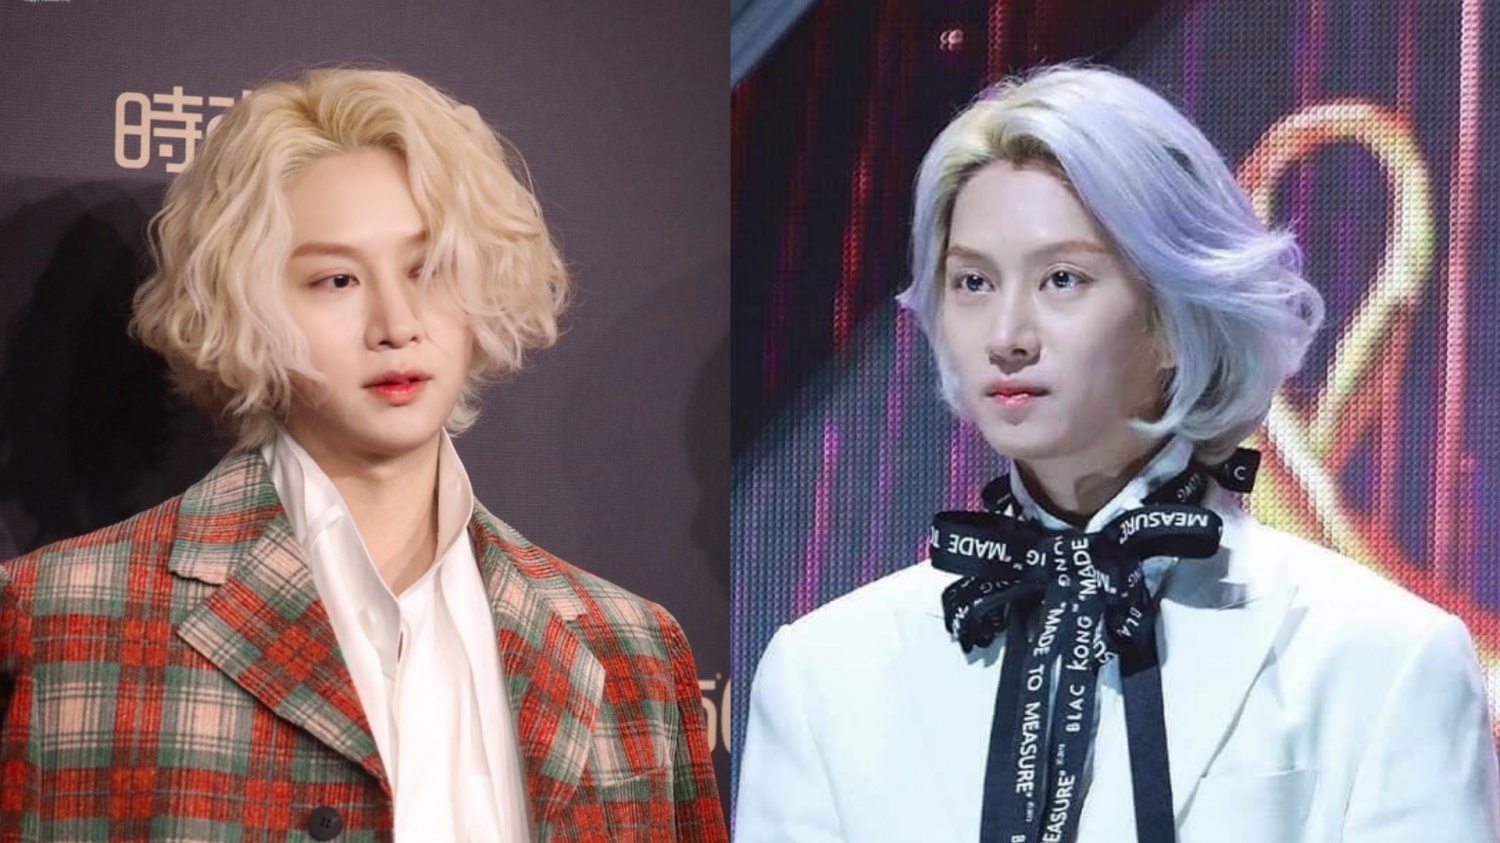 Which Hairsyle Does Heechul Rock The Most With His Blonde Hair: Straight or Curly?